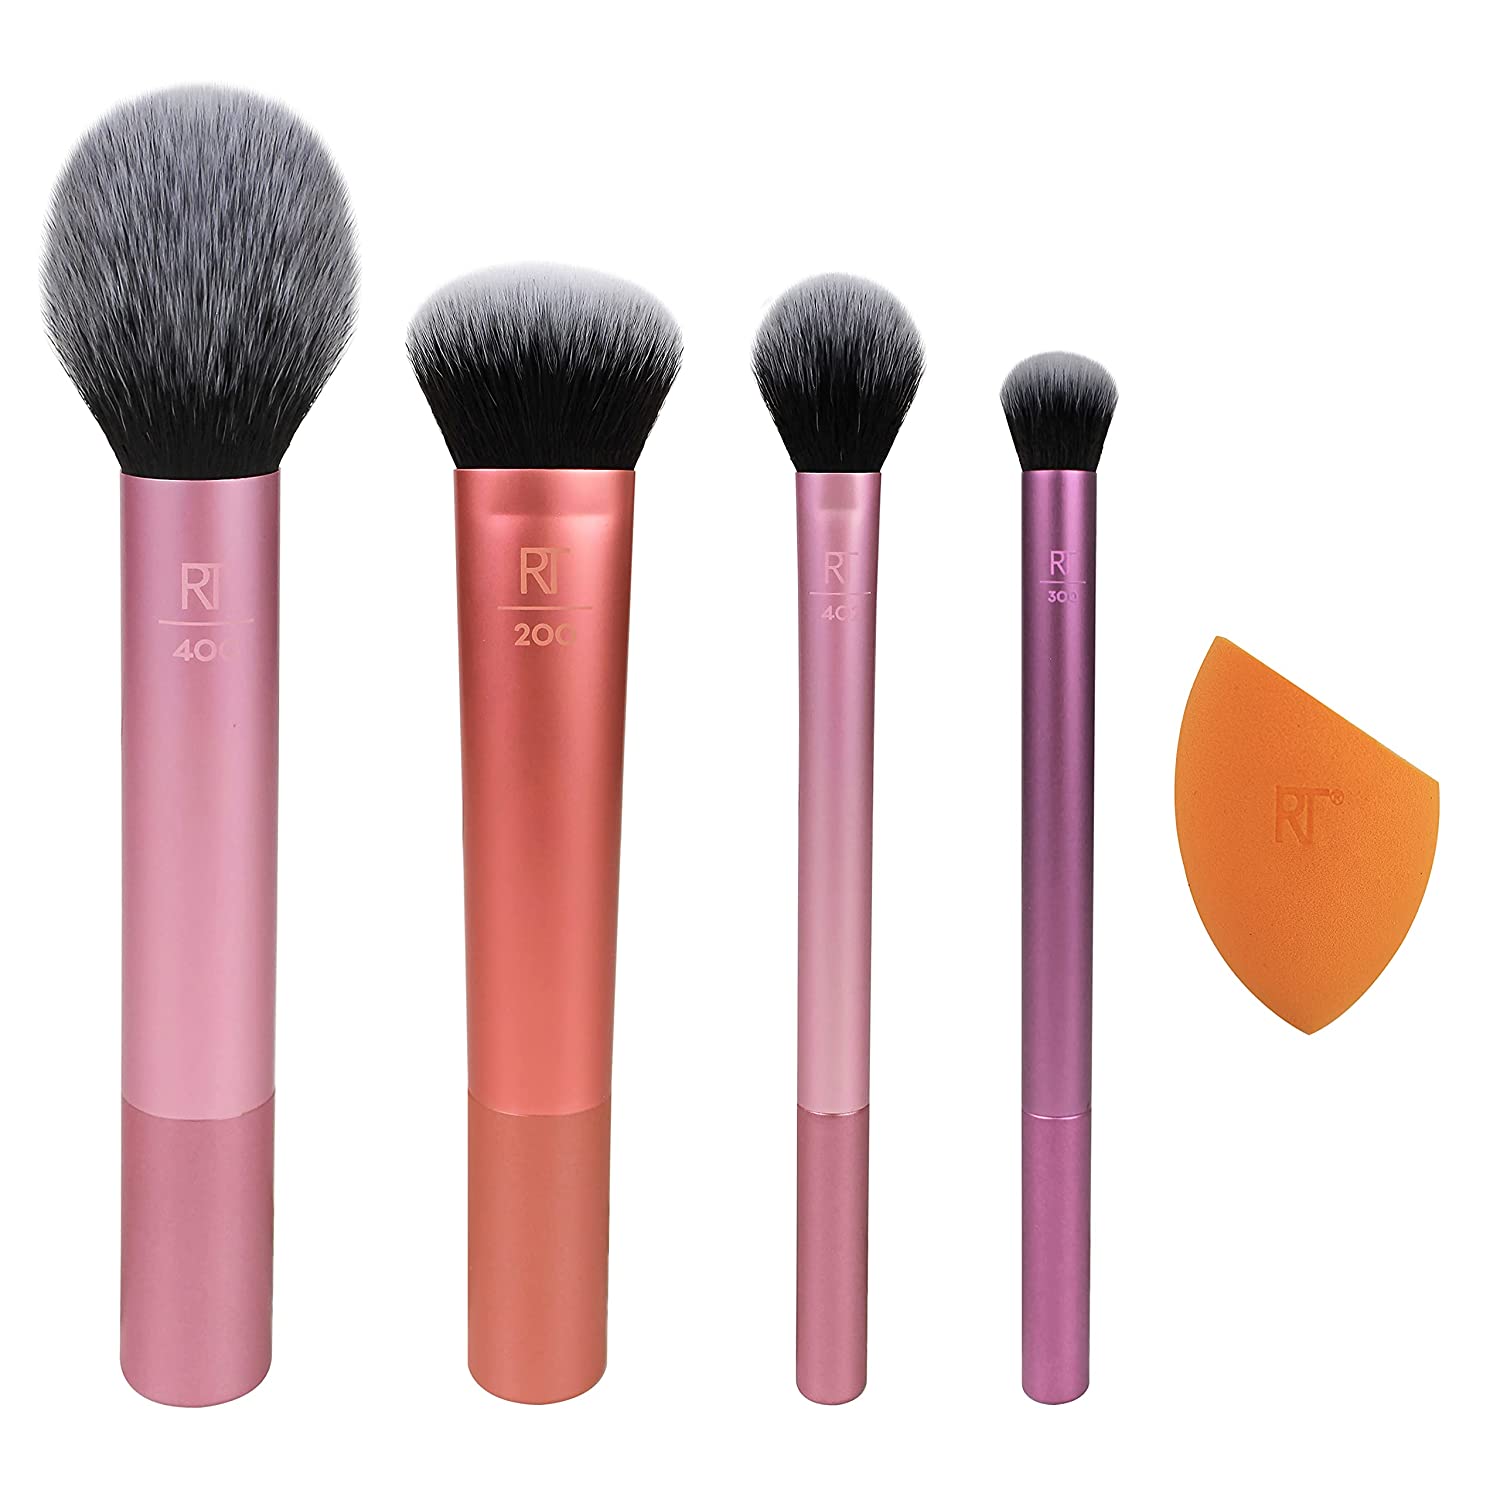 Real Techniques Makeup Brushes Review